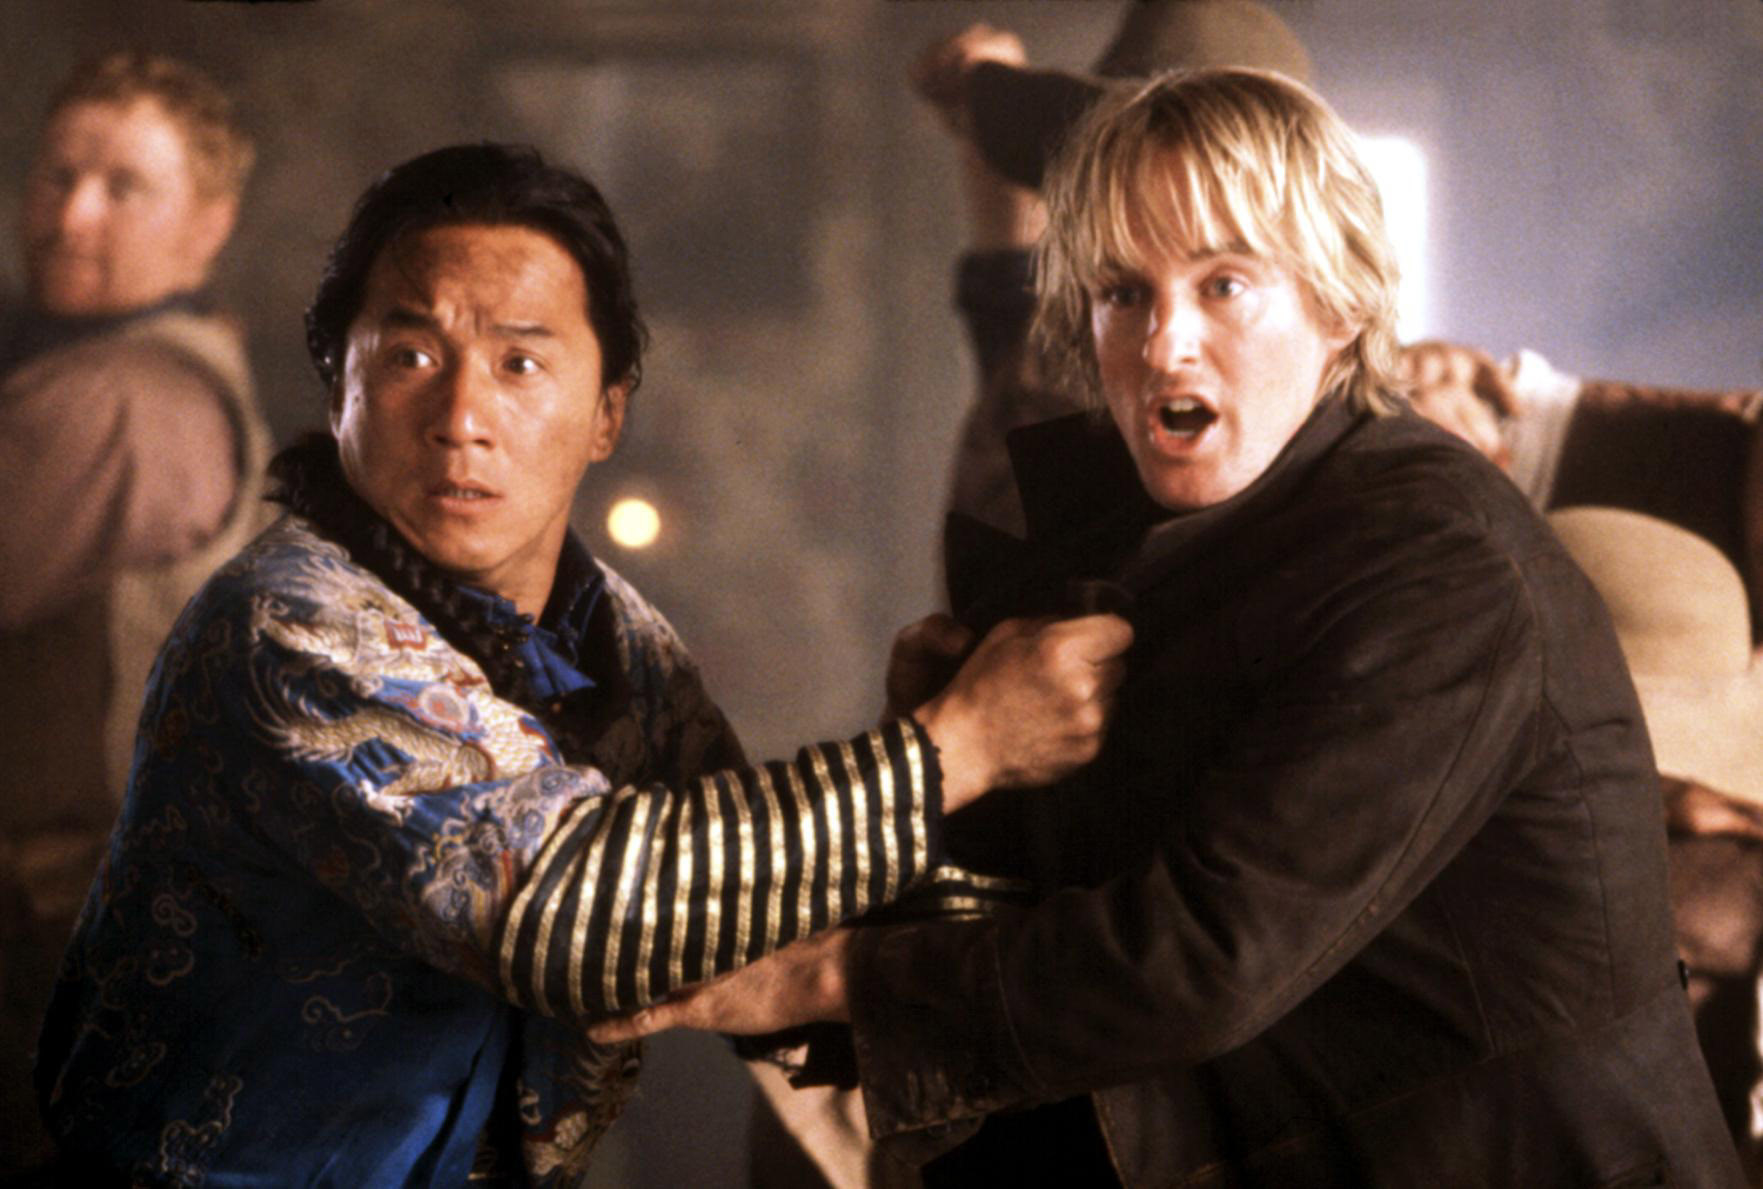 Jackie Chan and Owen Wilson grabbing each other